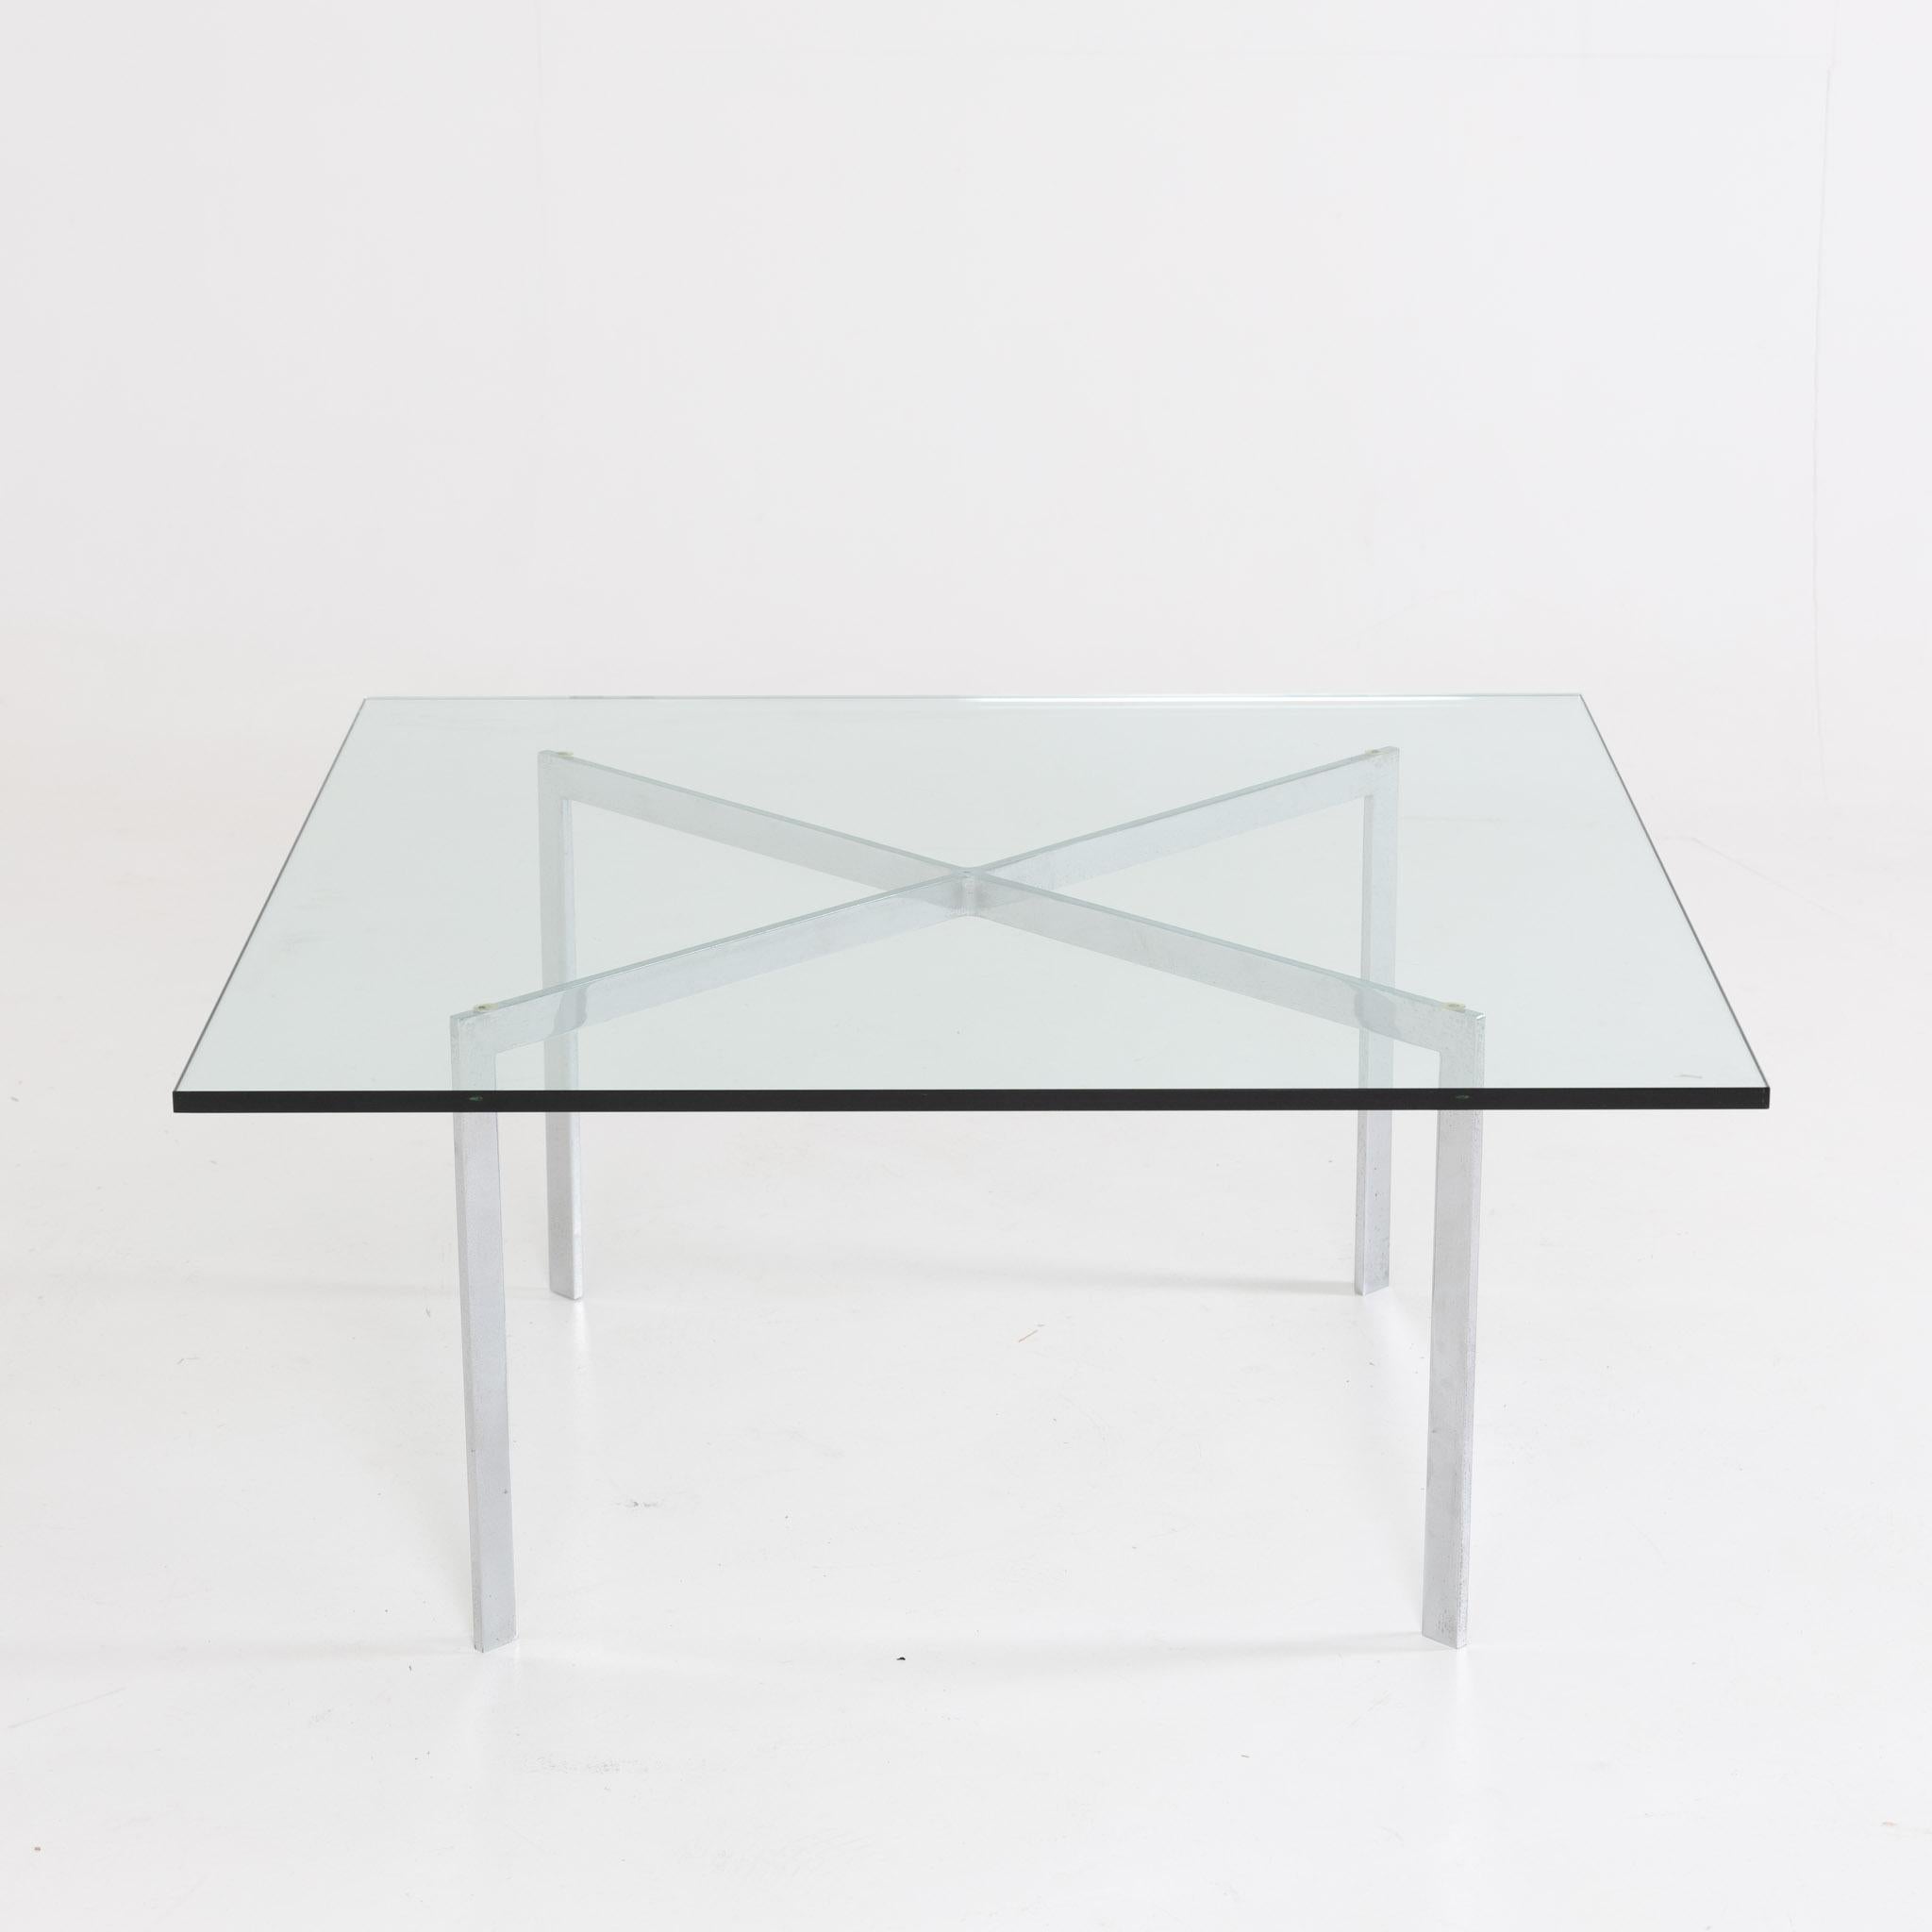 Barcelona table, designed by Ludwig Mies van der Rohe. Table top in clear flat glass, and chrome polished base.